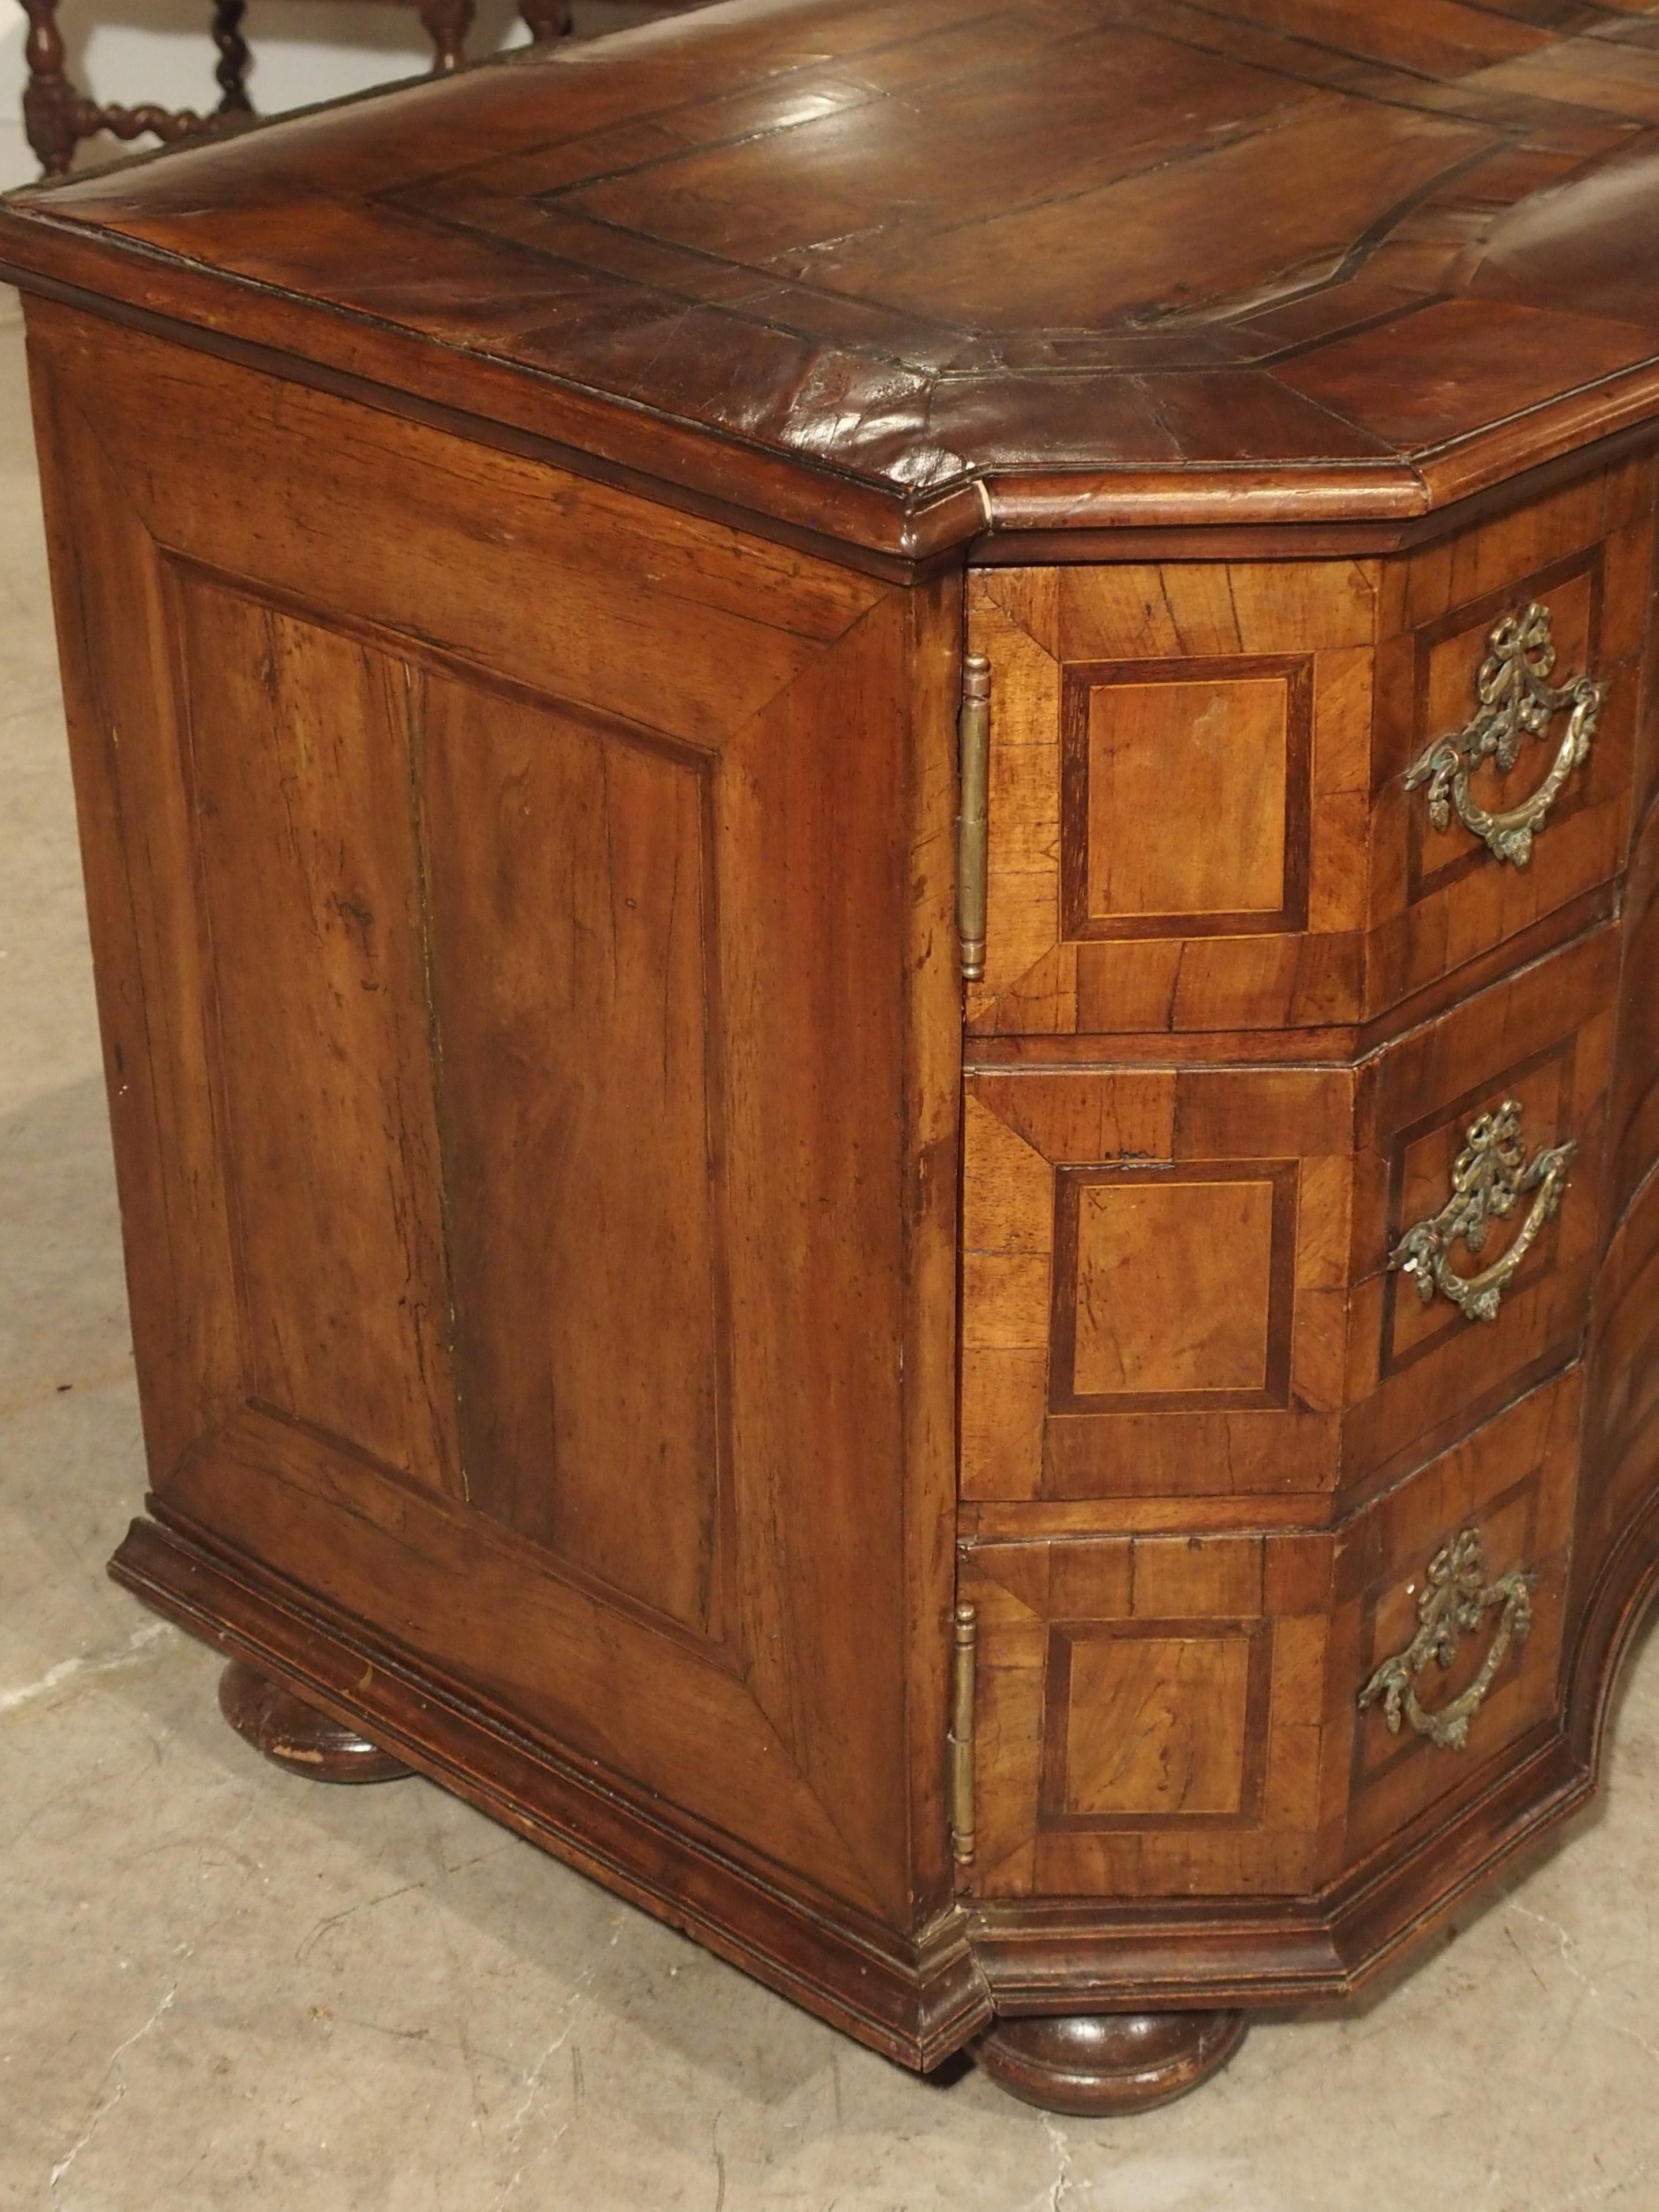 This unique and elegant walnut veneer commode-form buffet is from Southern Germany, circa 1760.

Originally produced as a three-row chest of drawers, a previous owner had the commode repurposed into a two-door buffet. This transformation took